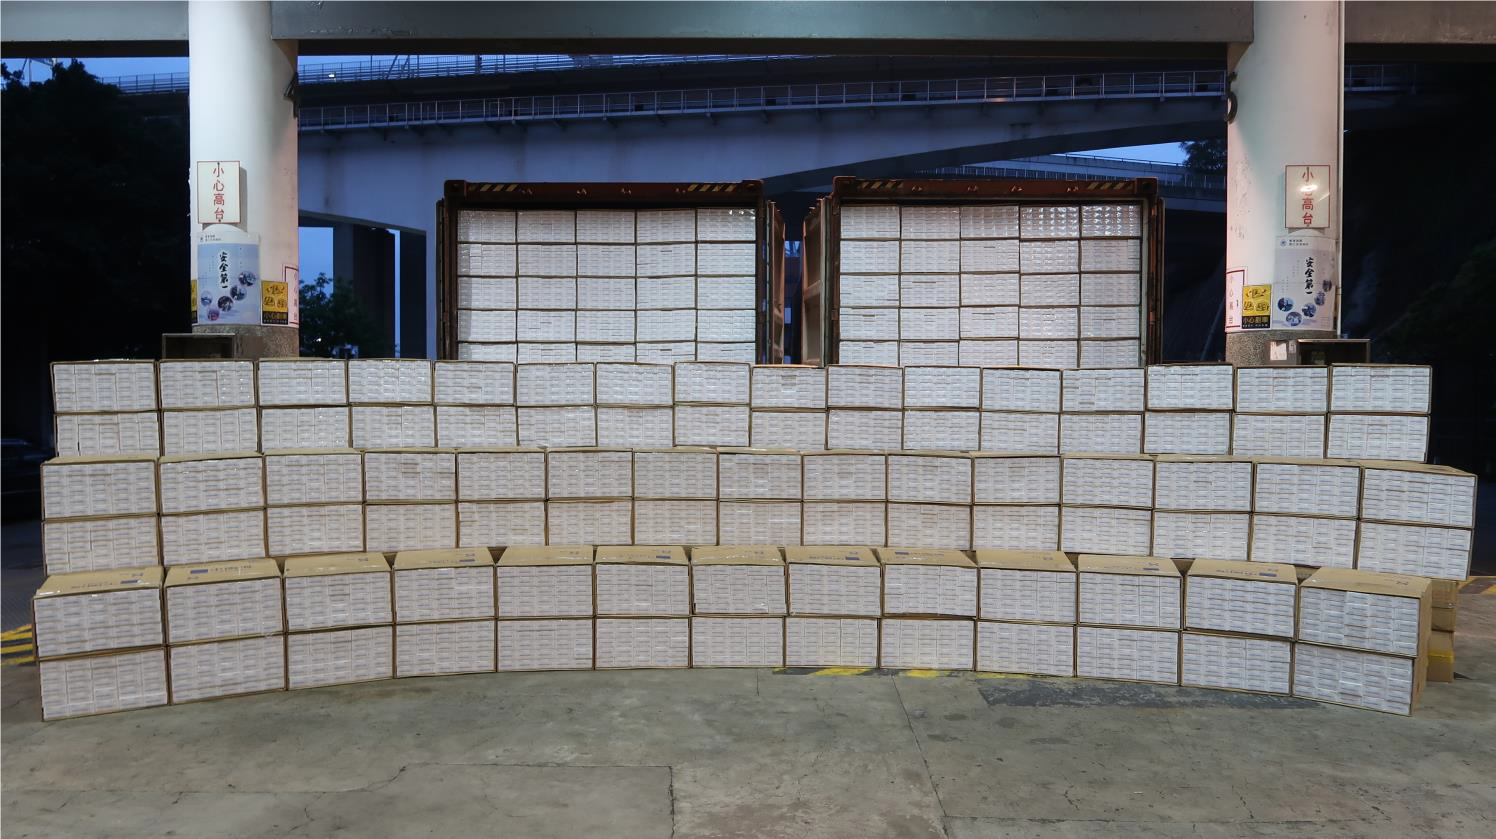 Hong Kong Customs on April 13 detected a suspected illicit cigarette smuggling case involving a barge in the waters off Tsing Yi. About 20 million suspected illicit cigarettes with an estimated market value of about $74 million and a duty potential of about $50 million were seized. Photo shows the suspected illicit cigarettes seized.